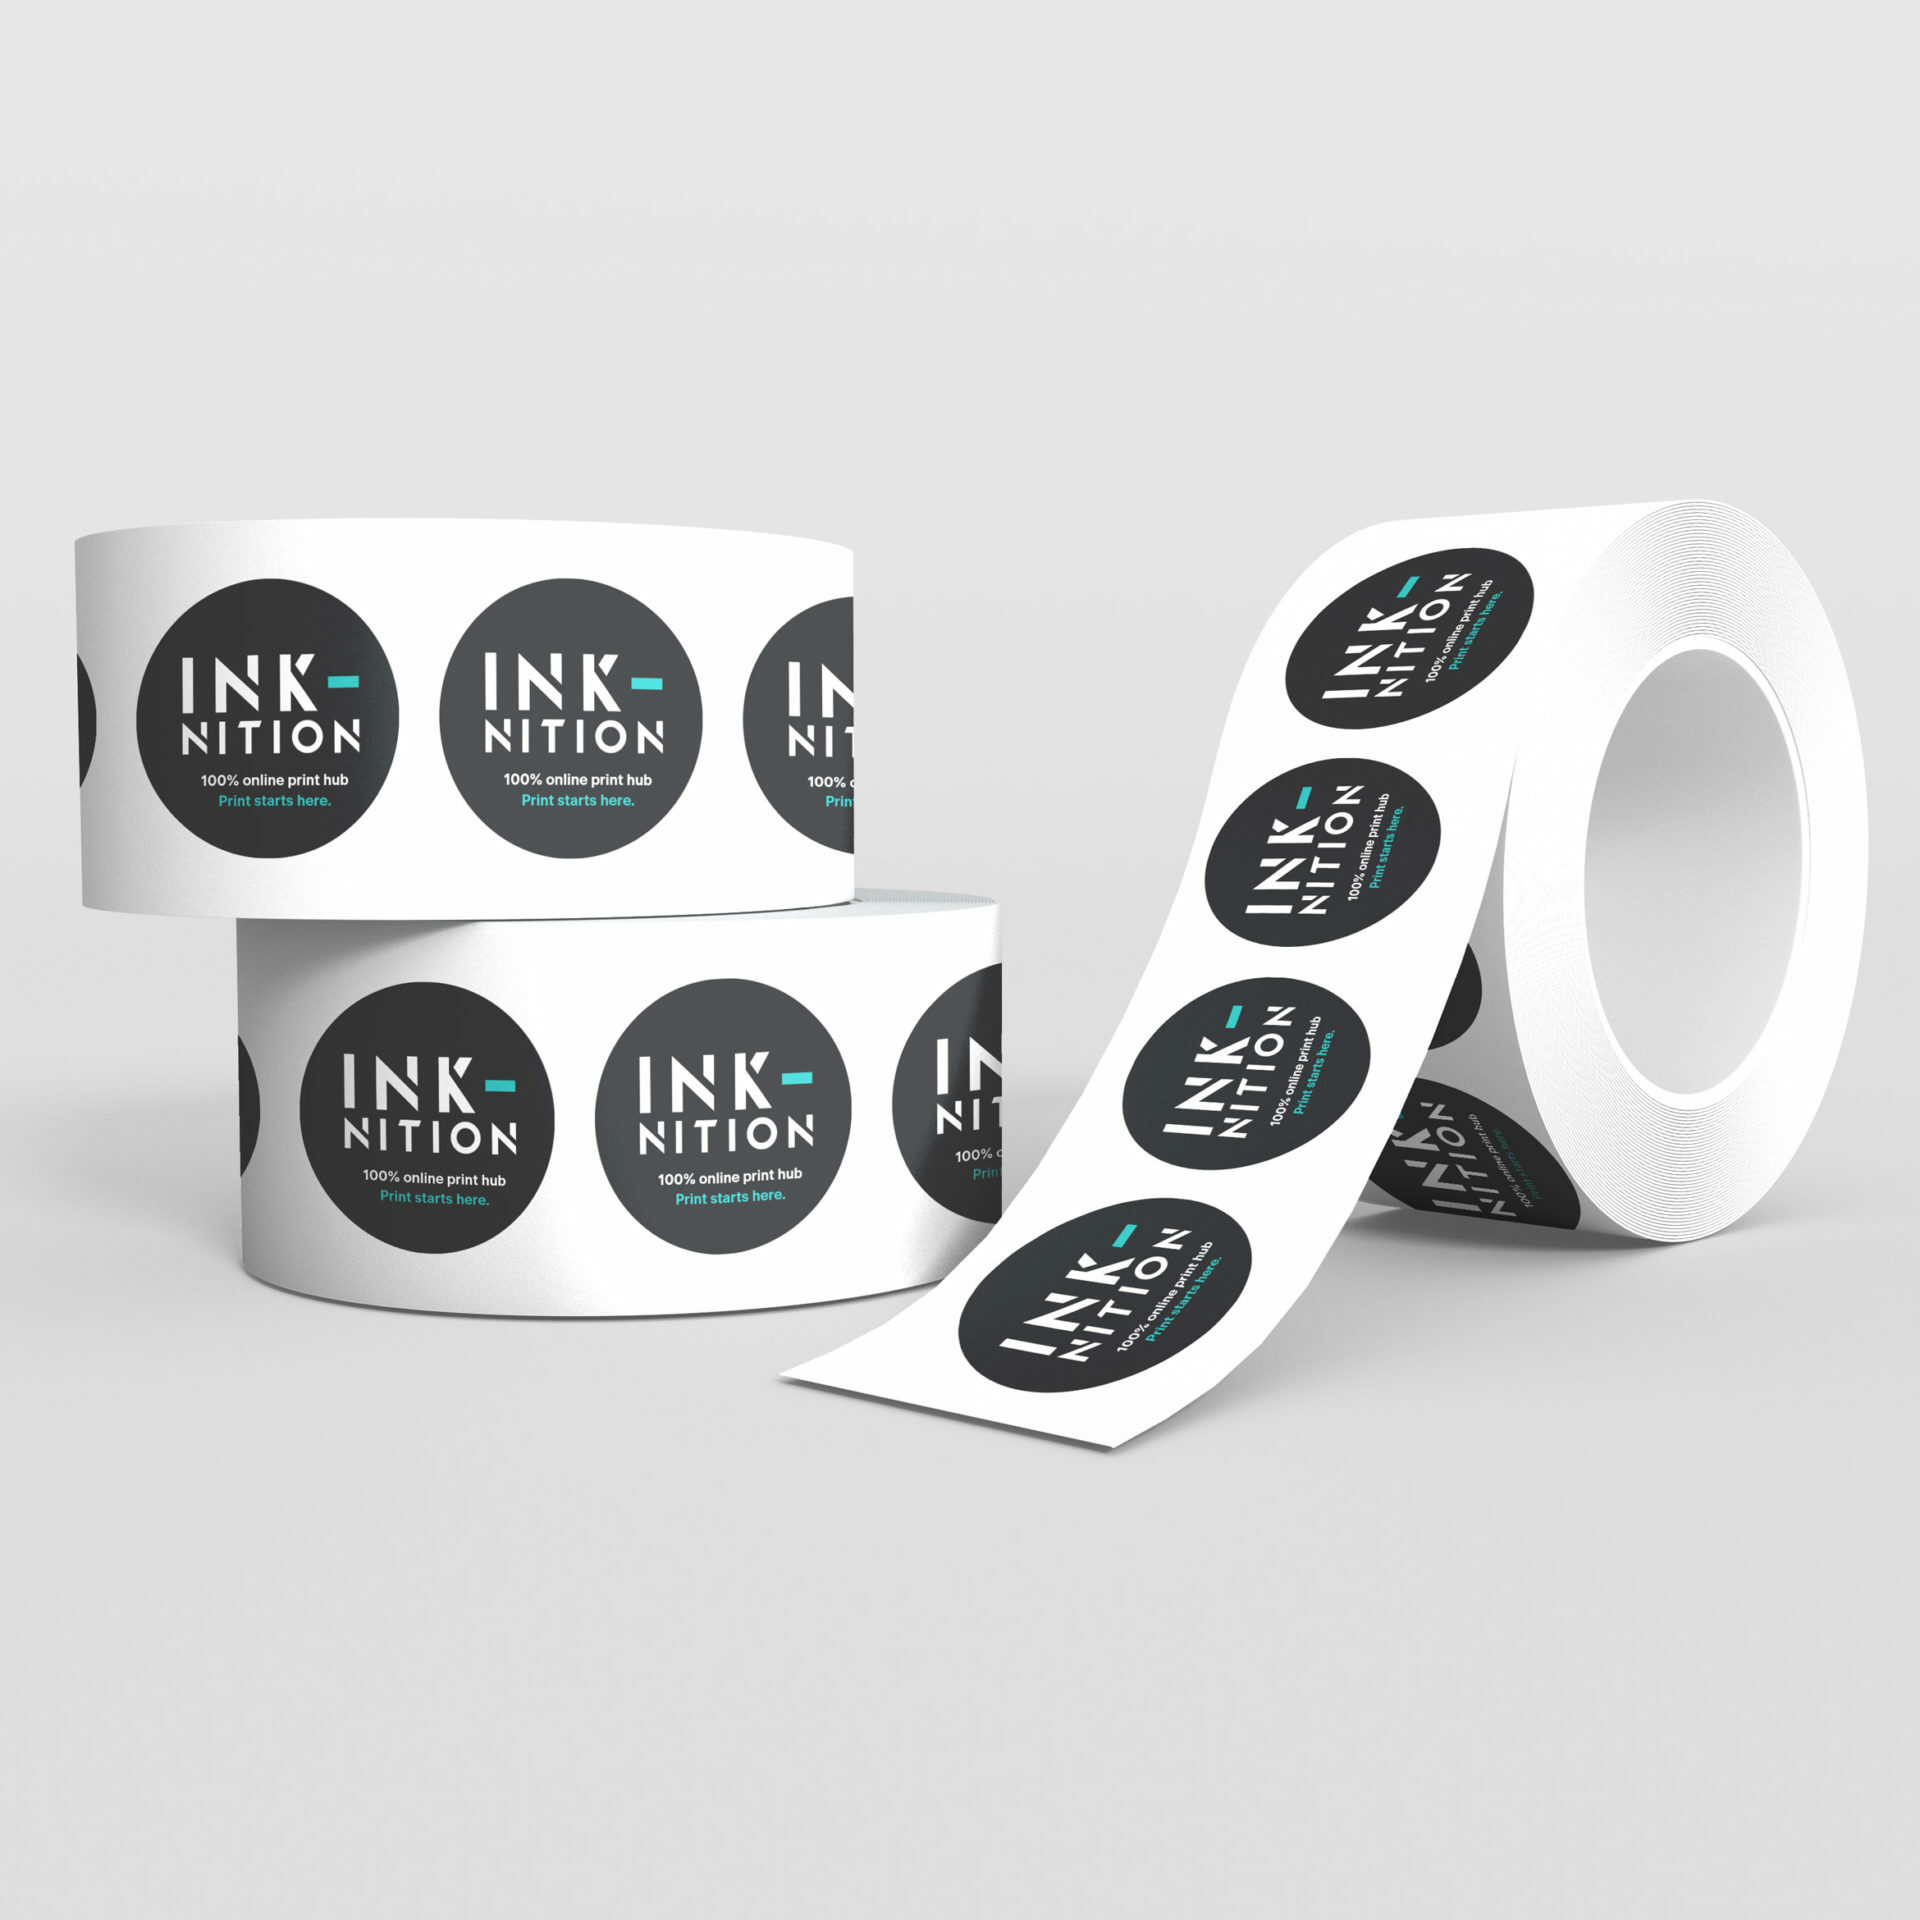 50mm-circle-stickers-printed-in-colour-on-gloss-white-vinyl-and-supplied-on-rolls